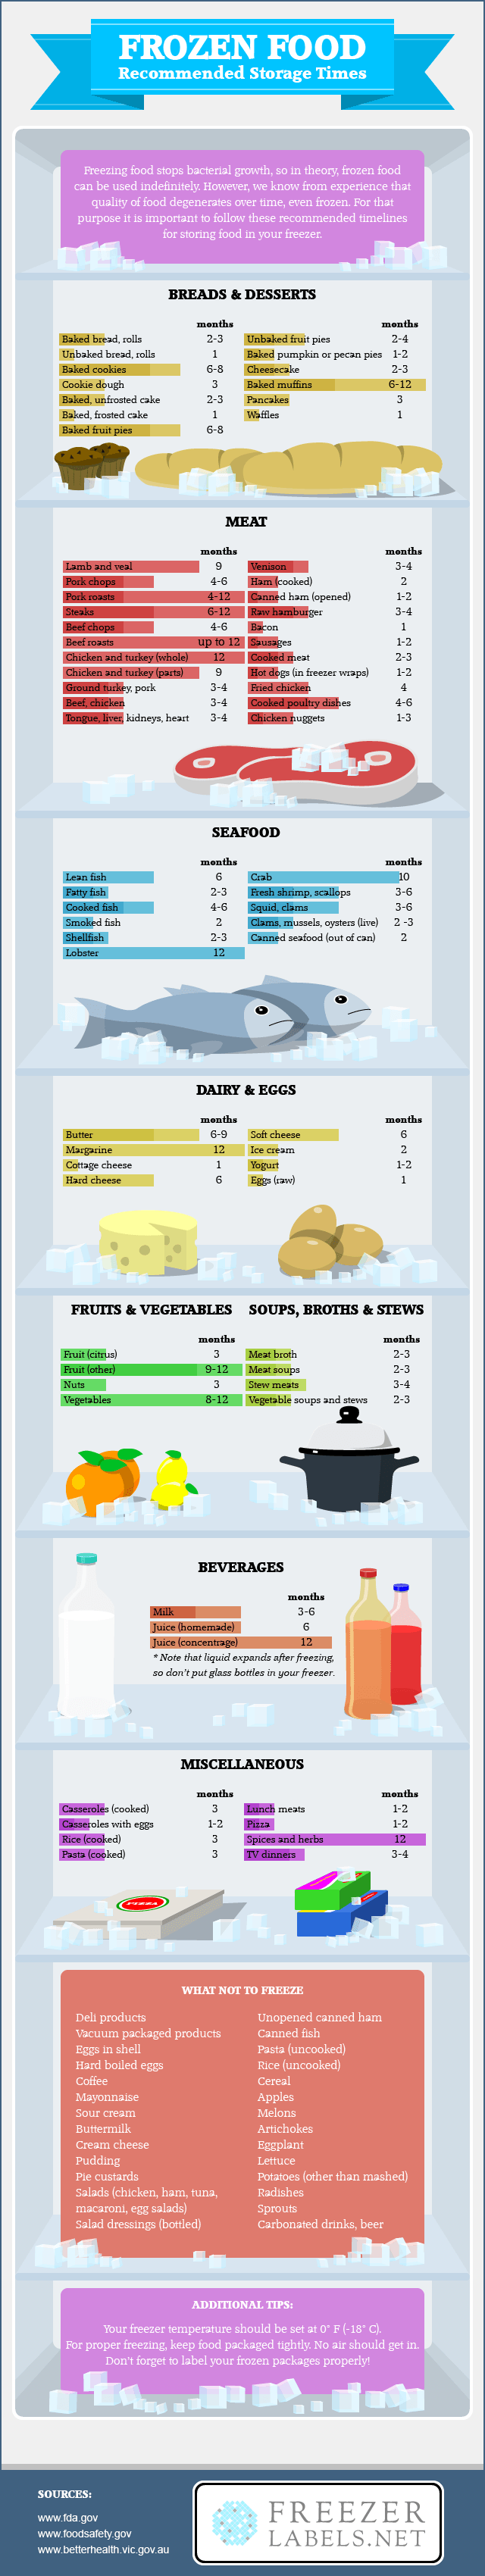 frozen-food-recommended-storage-times-infographic